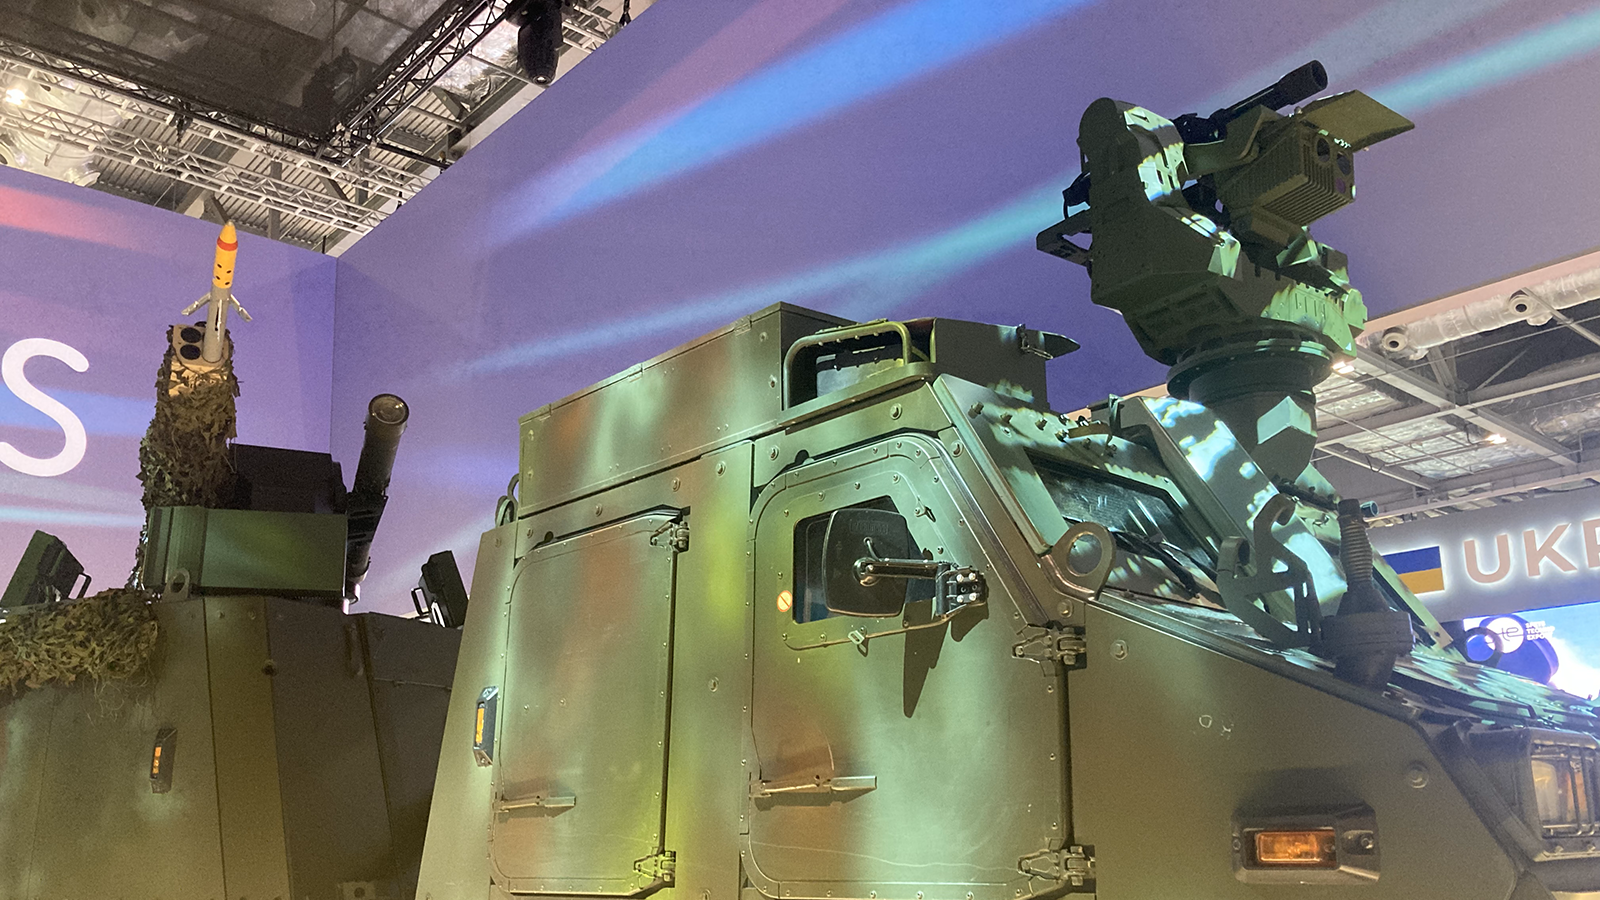 As drone warfare comes to the fore, BAE sees counter-drone mission for its APC - Breaking Defense